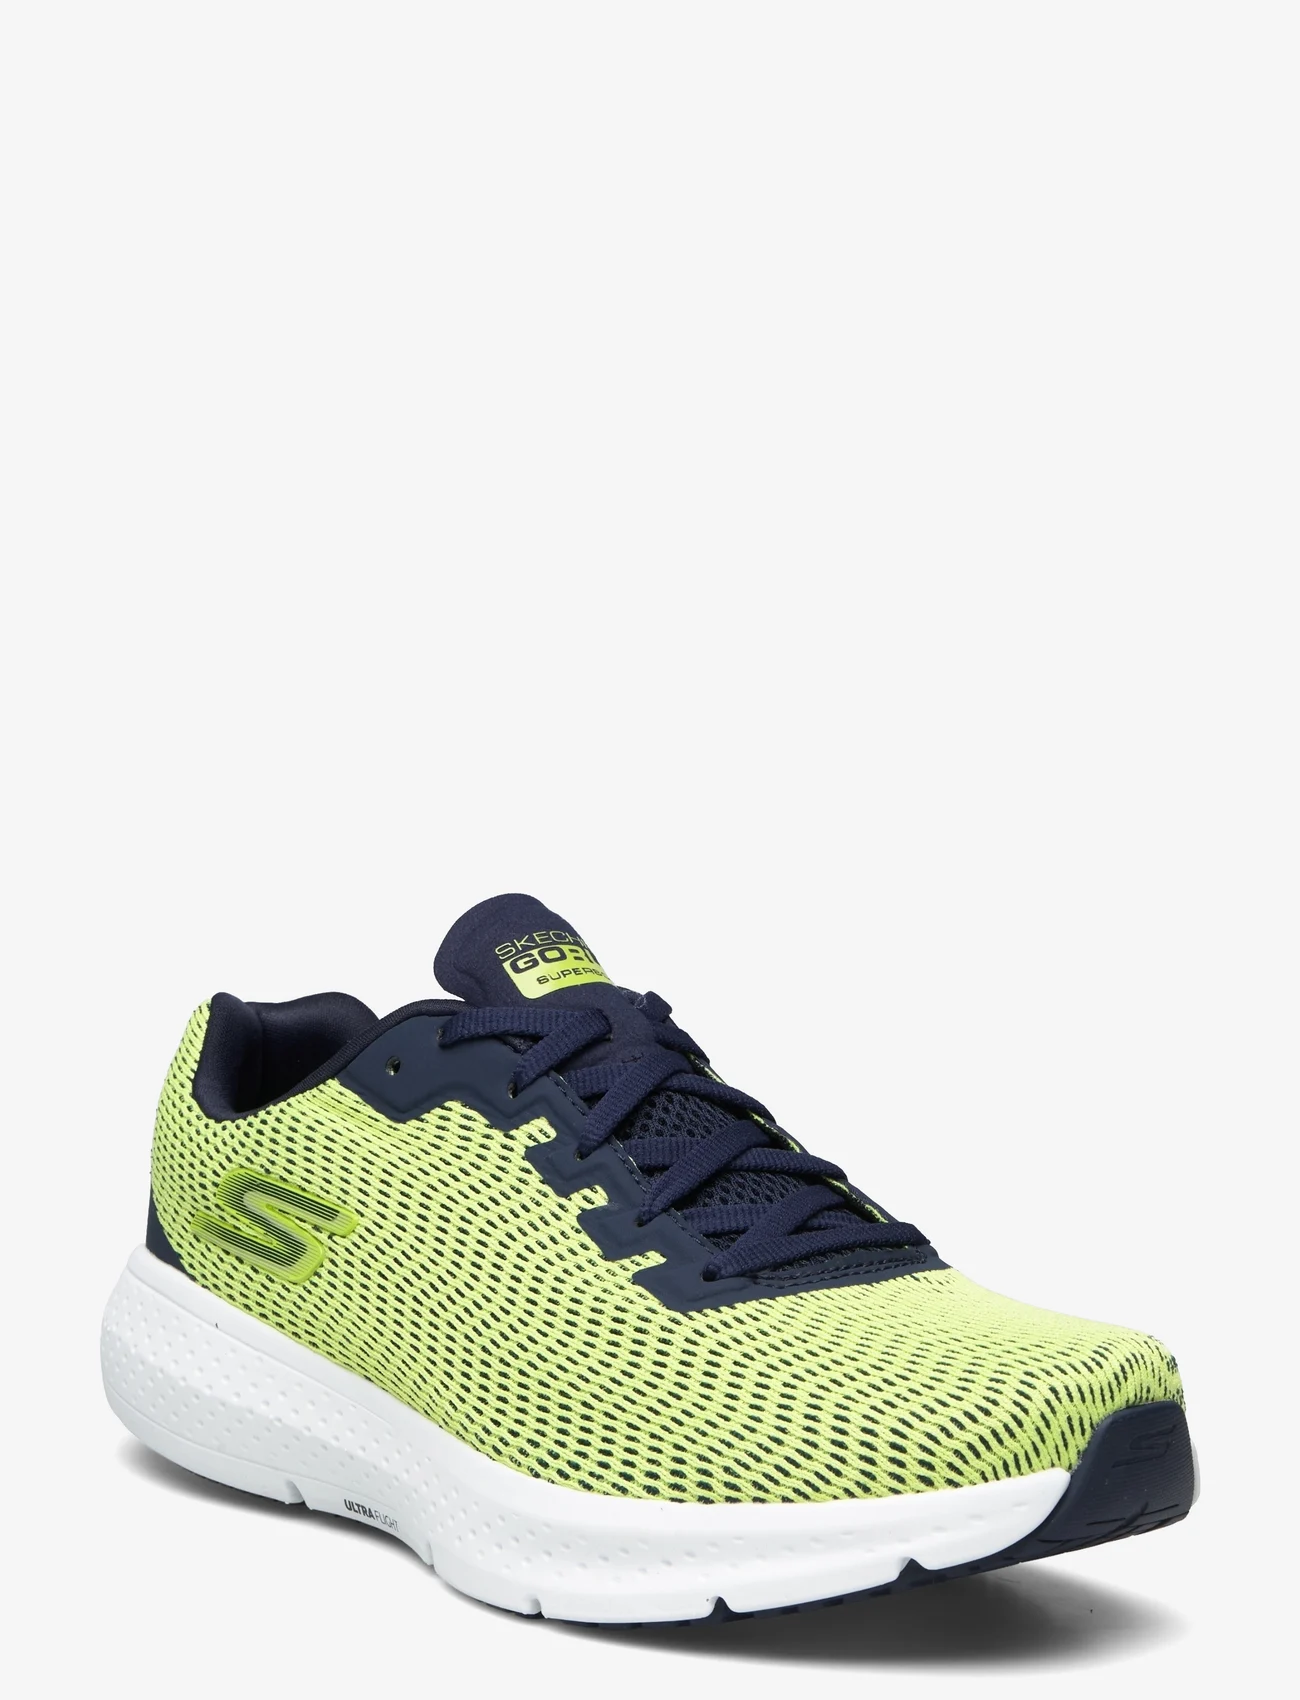 Skechers - Mens Go Run Supersonic  - Relaxed Fit - juoksukengät - ylnv yellow navy - 0